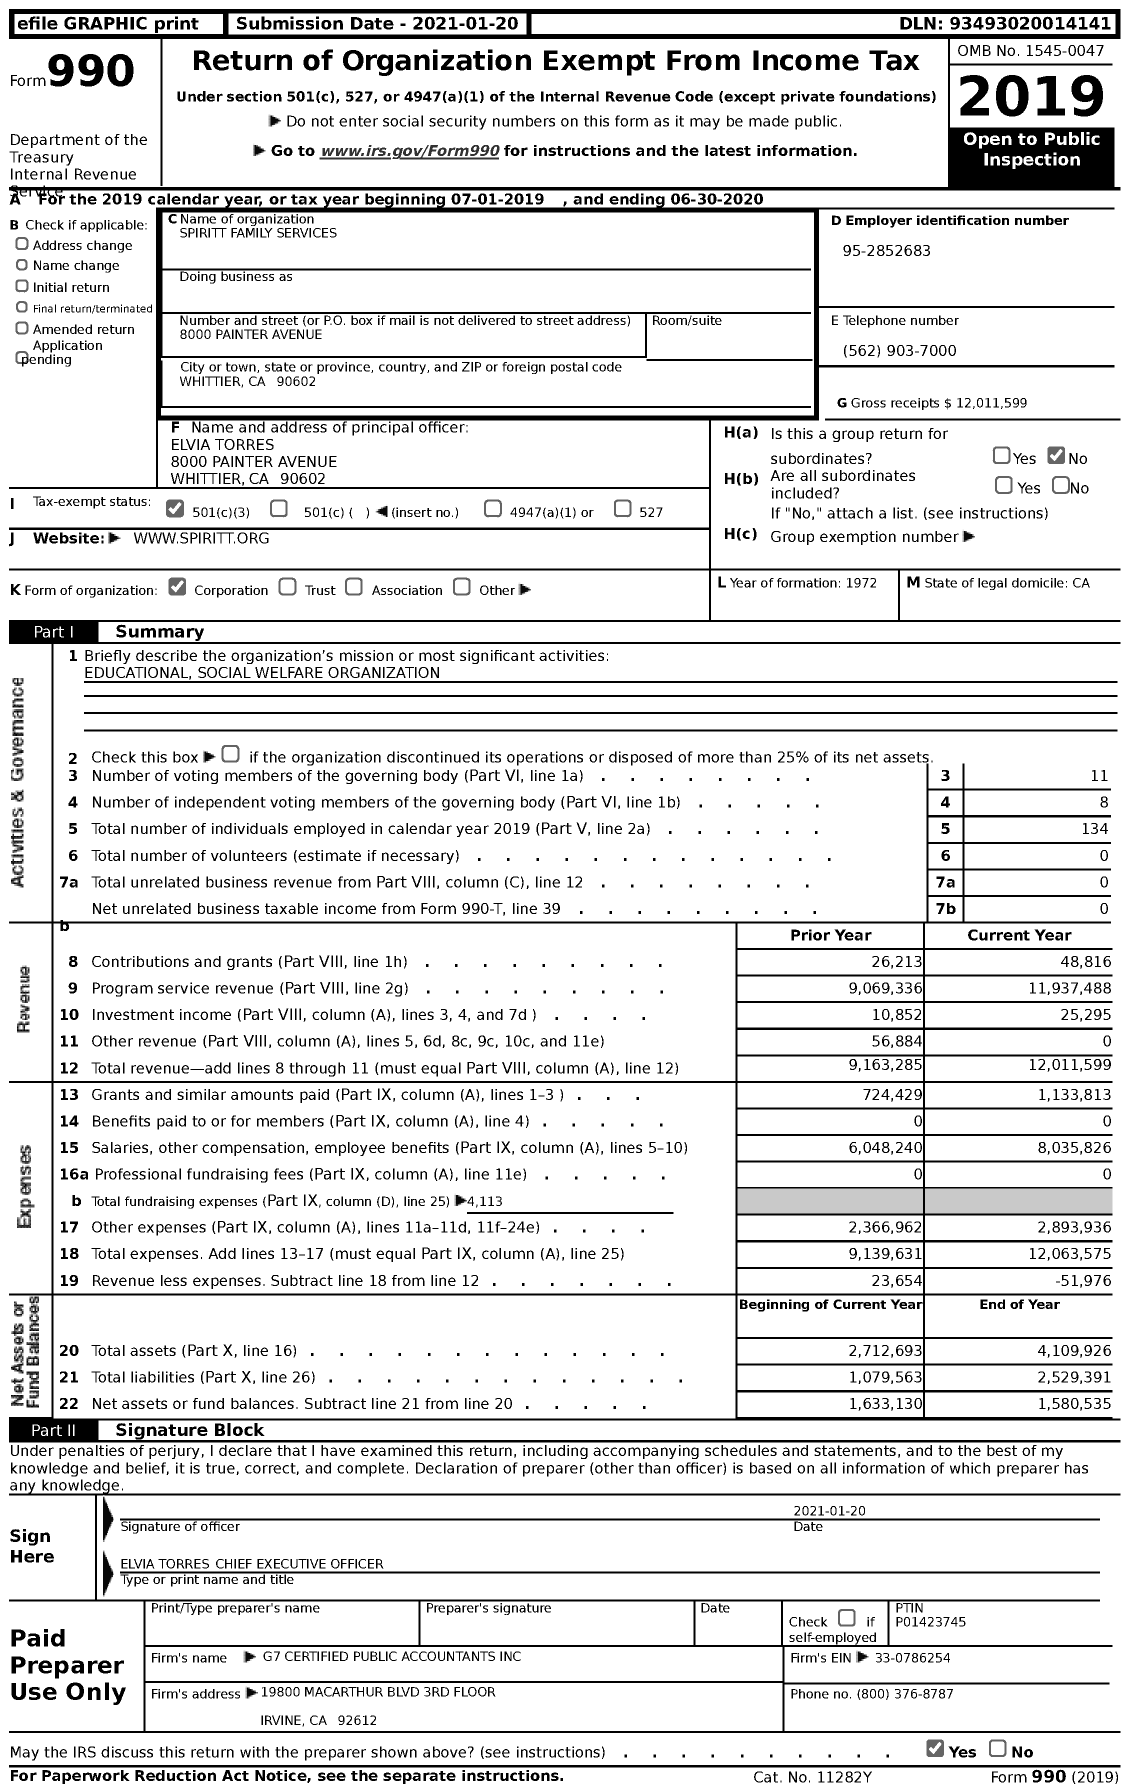 Image of first page of 2019 Form 990 for SPIRITT Family Services (SPIRITT)